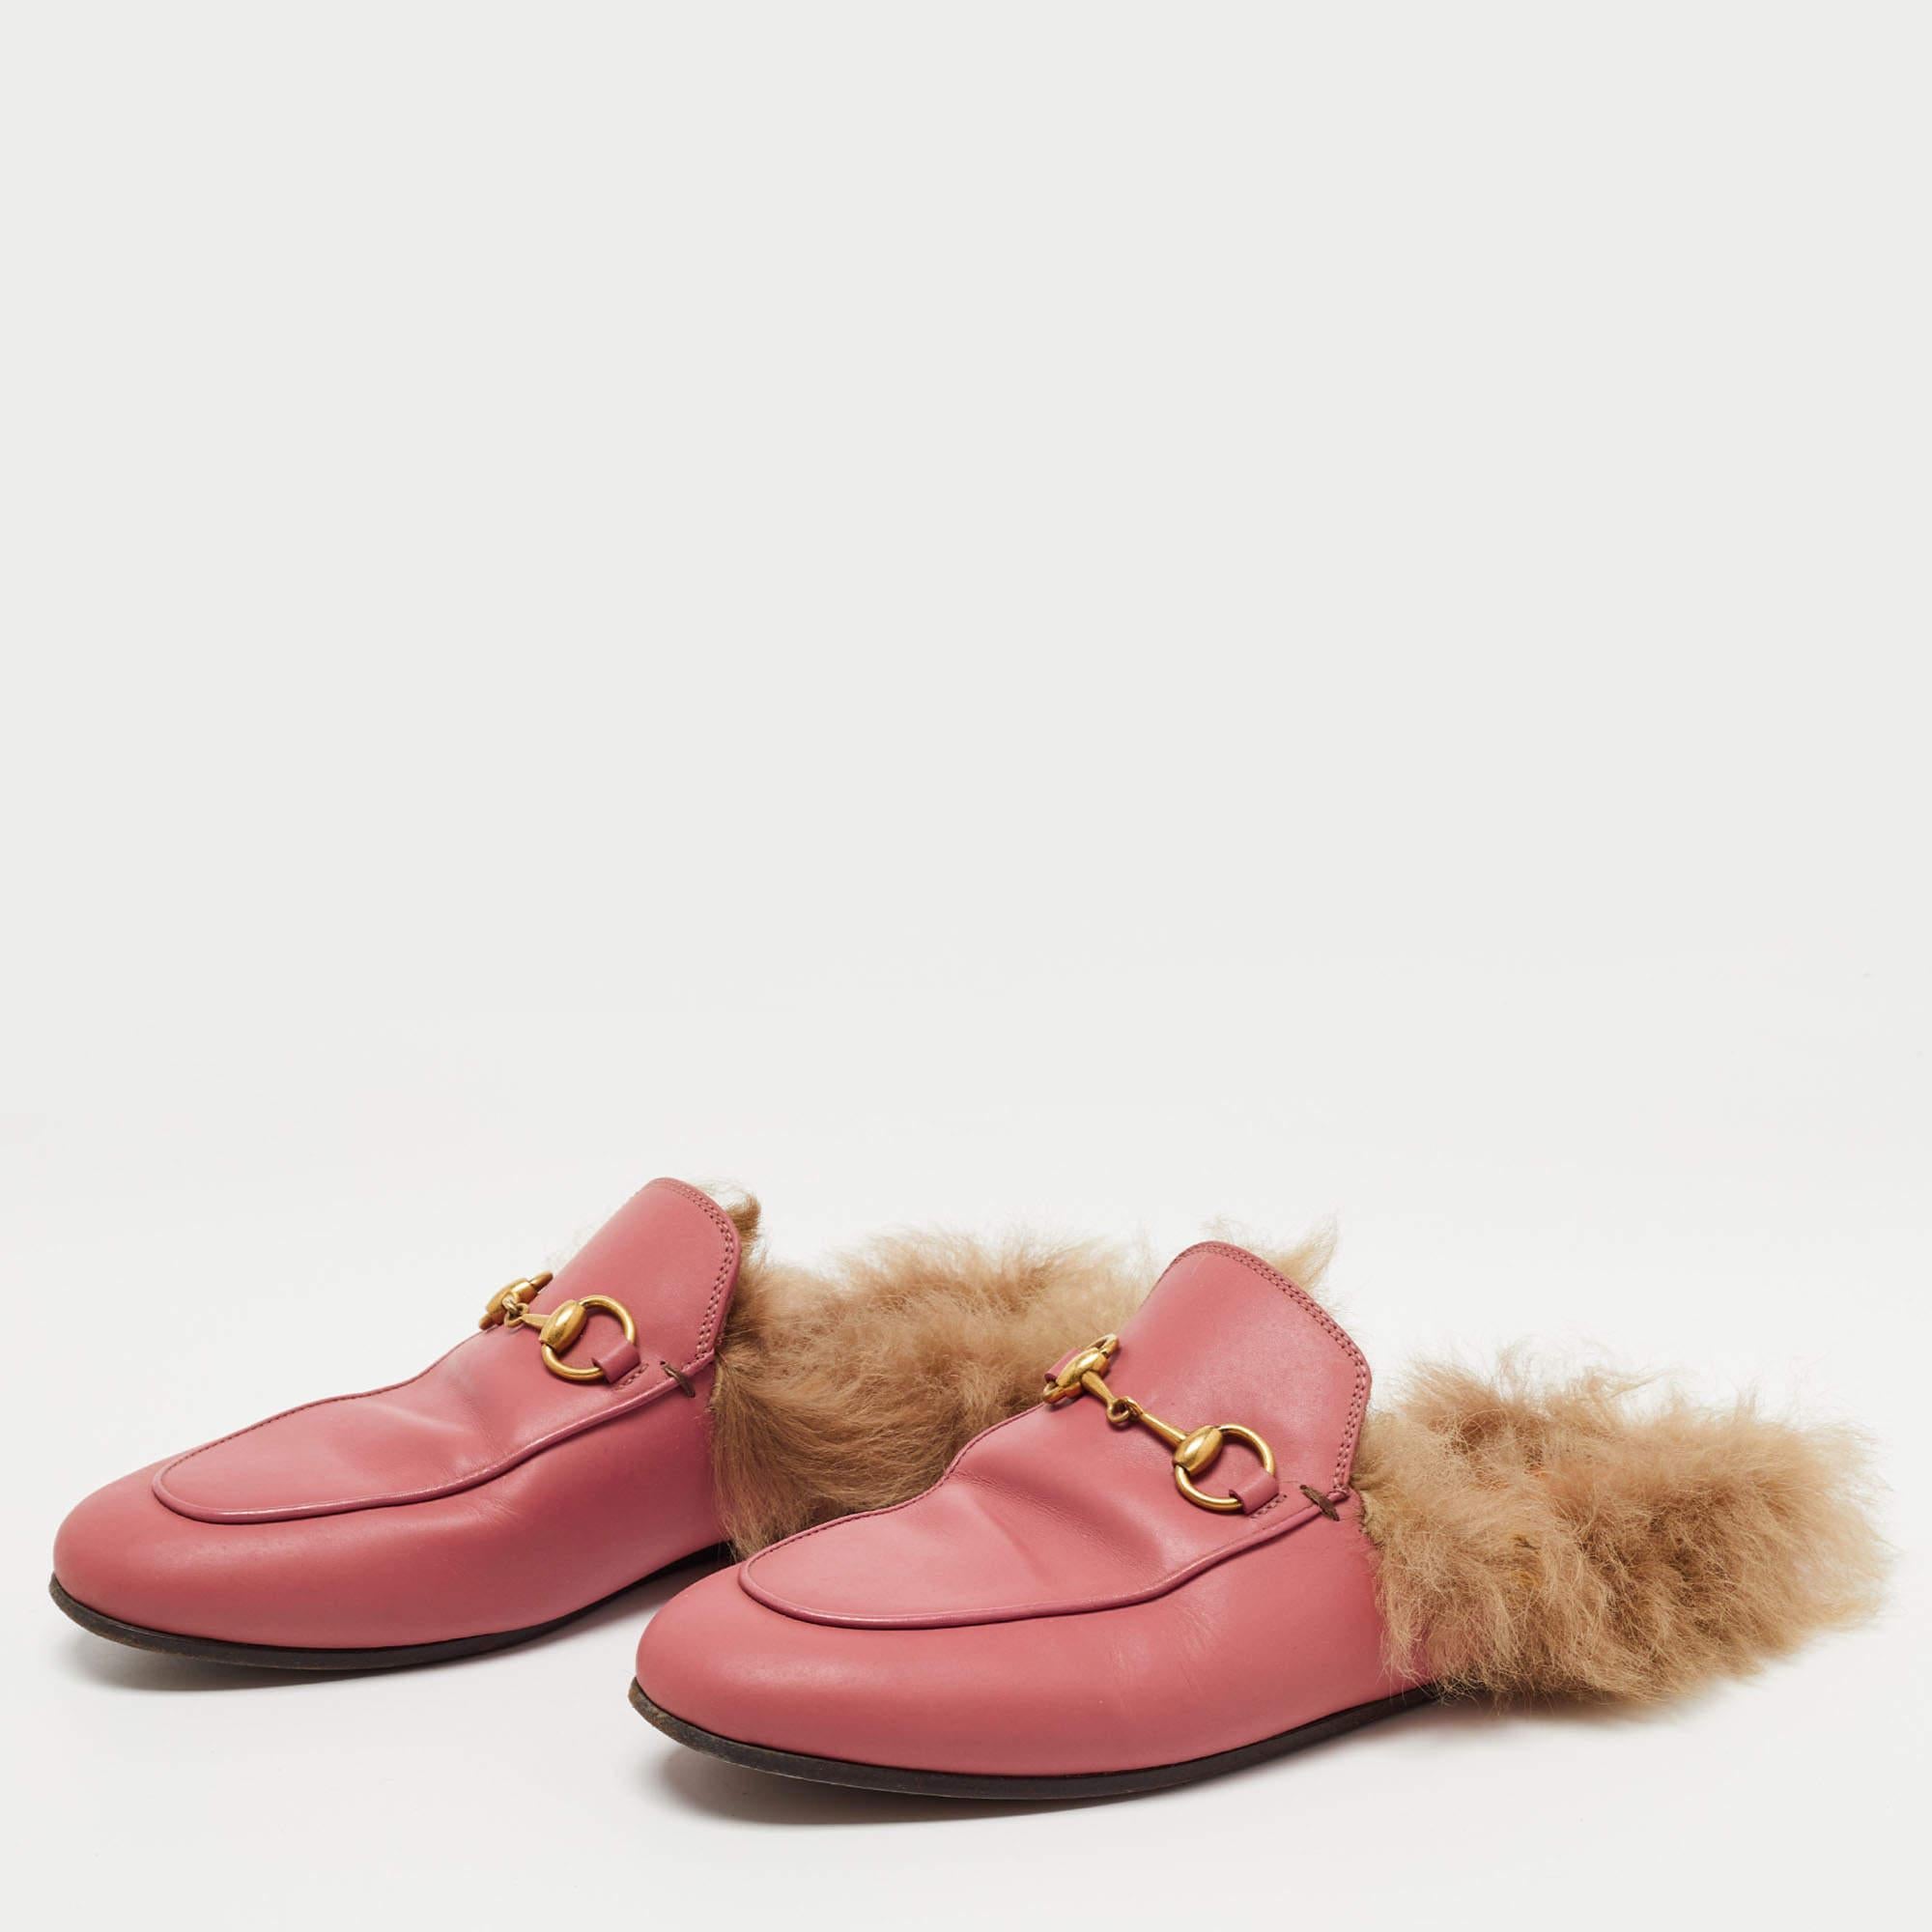 Gucci Prink Leather and Fur Princetown Mules Size 36 7